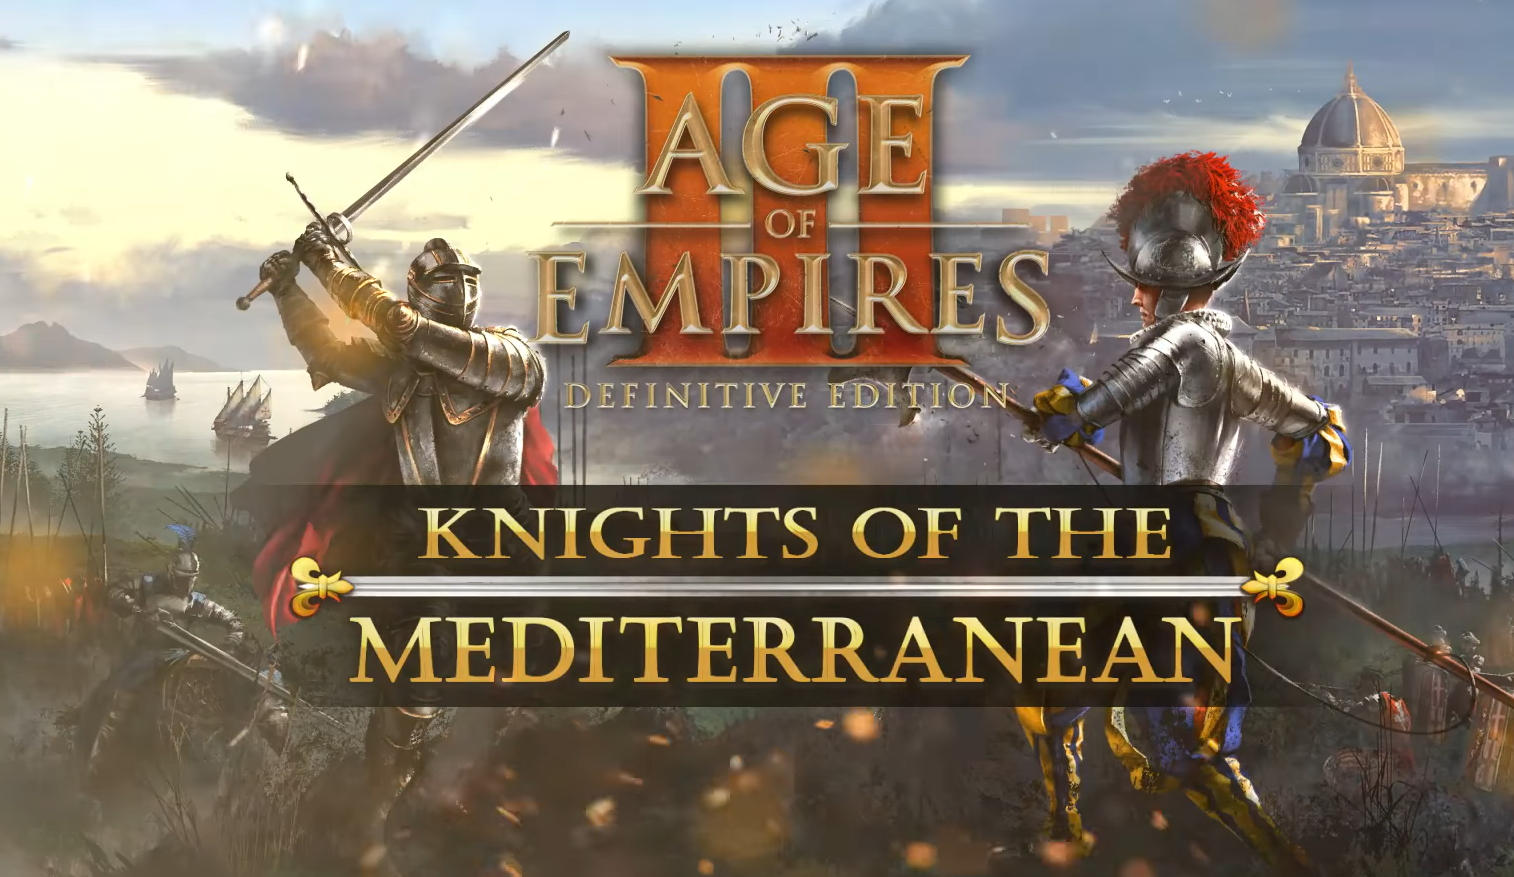 age of empires 3 knights of the mediterranean download free